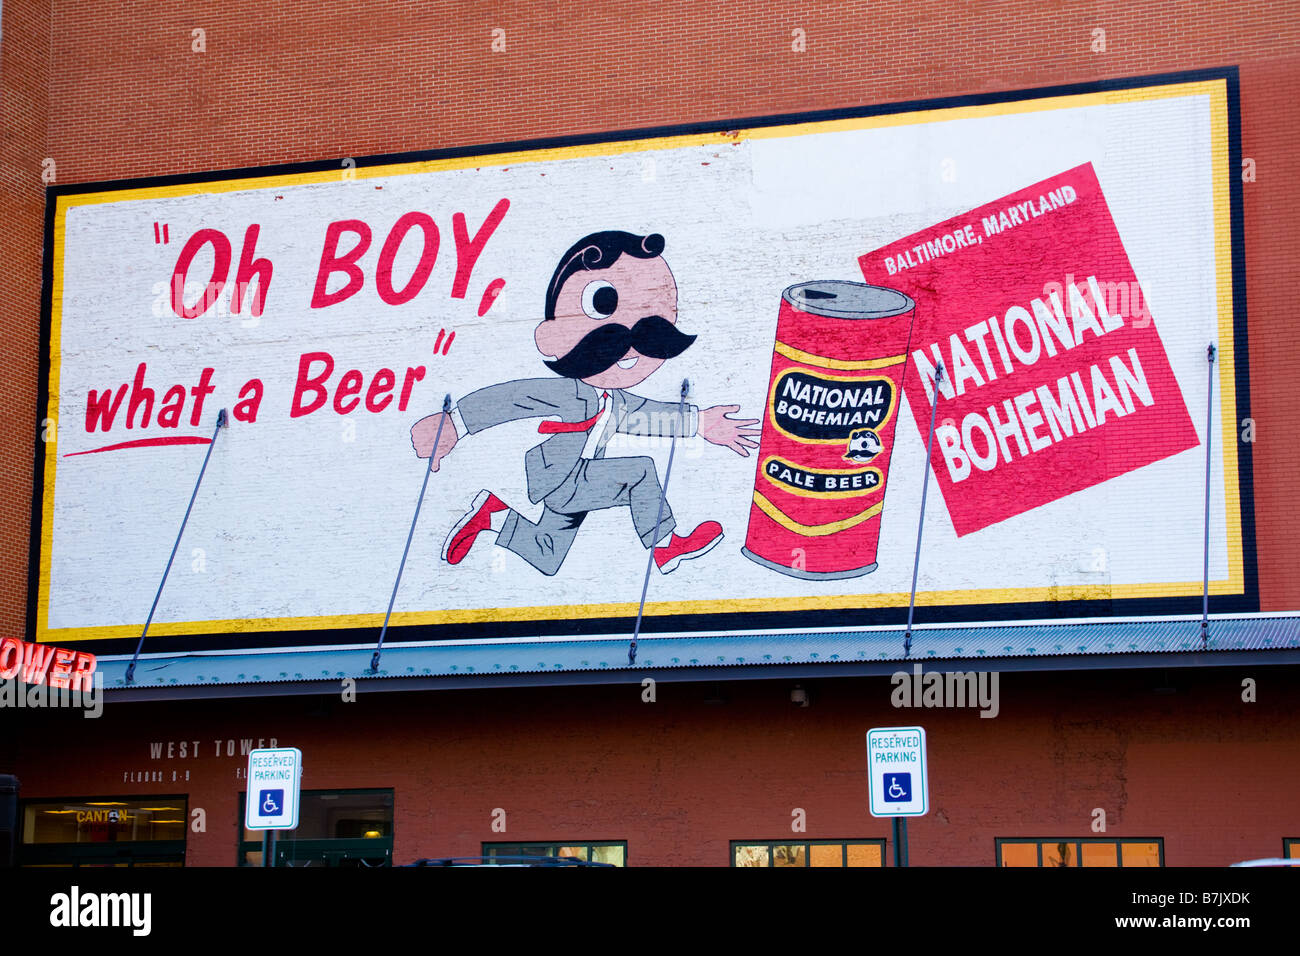 Mister Boh National Bohemian beer ad Brewers Hill neighborhood Baltimore Maryland Stock Photo